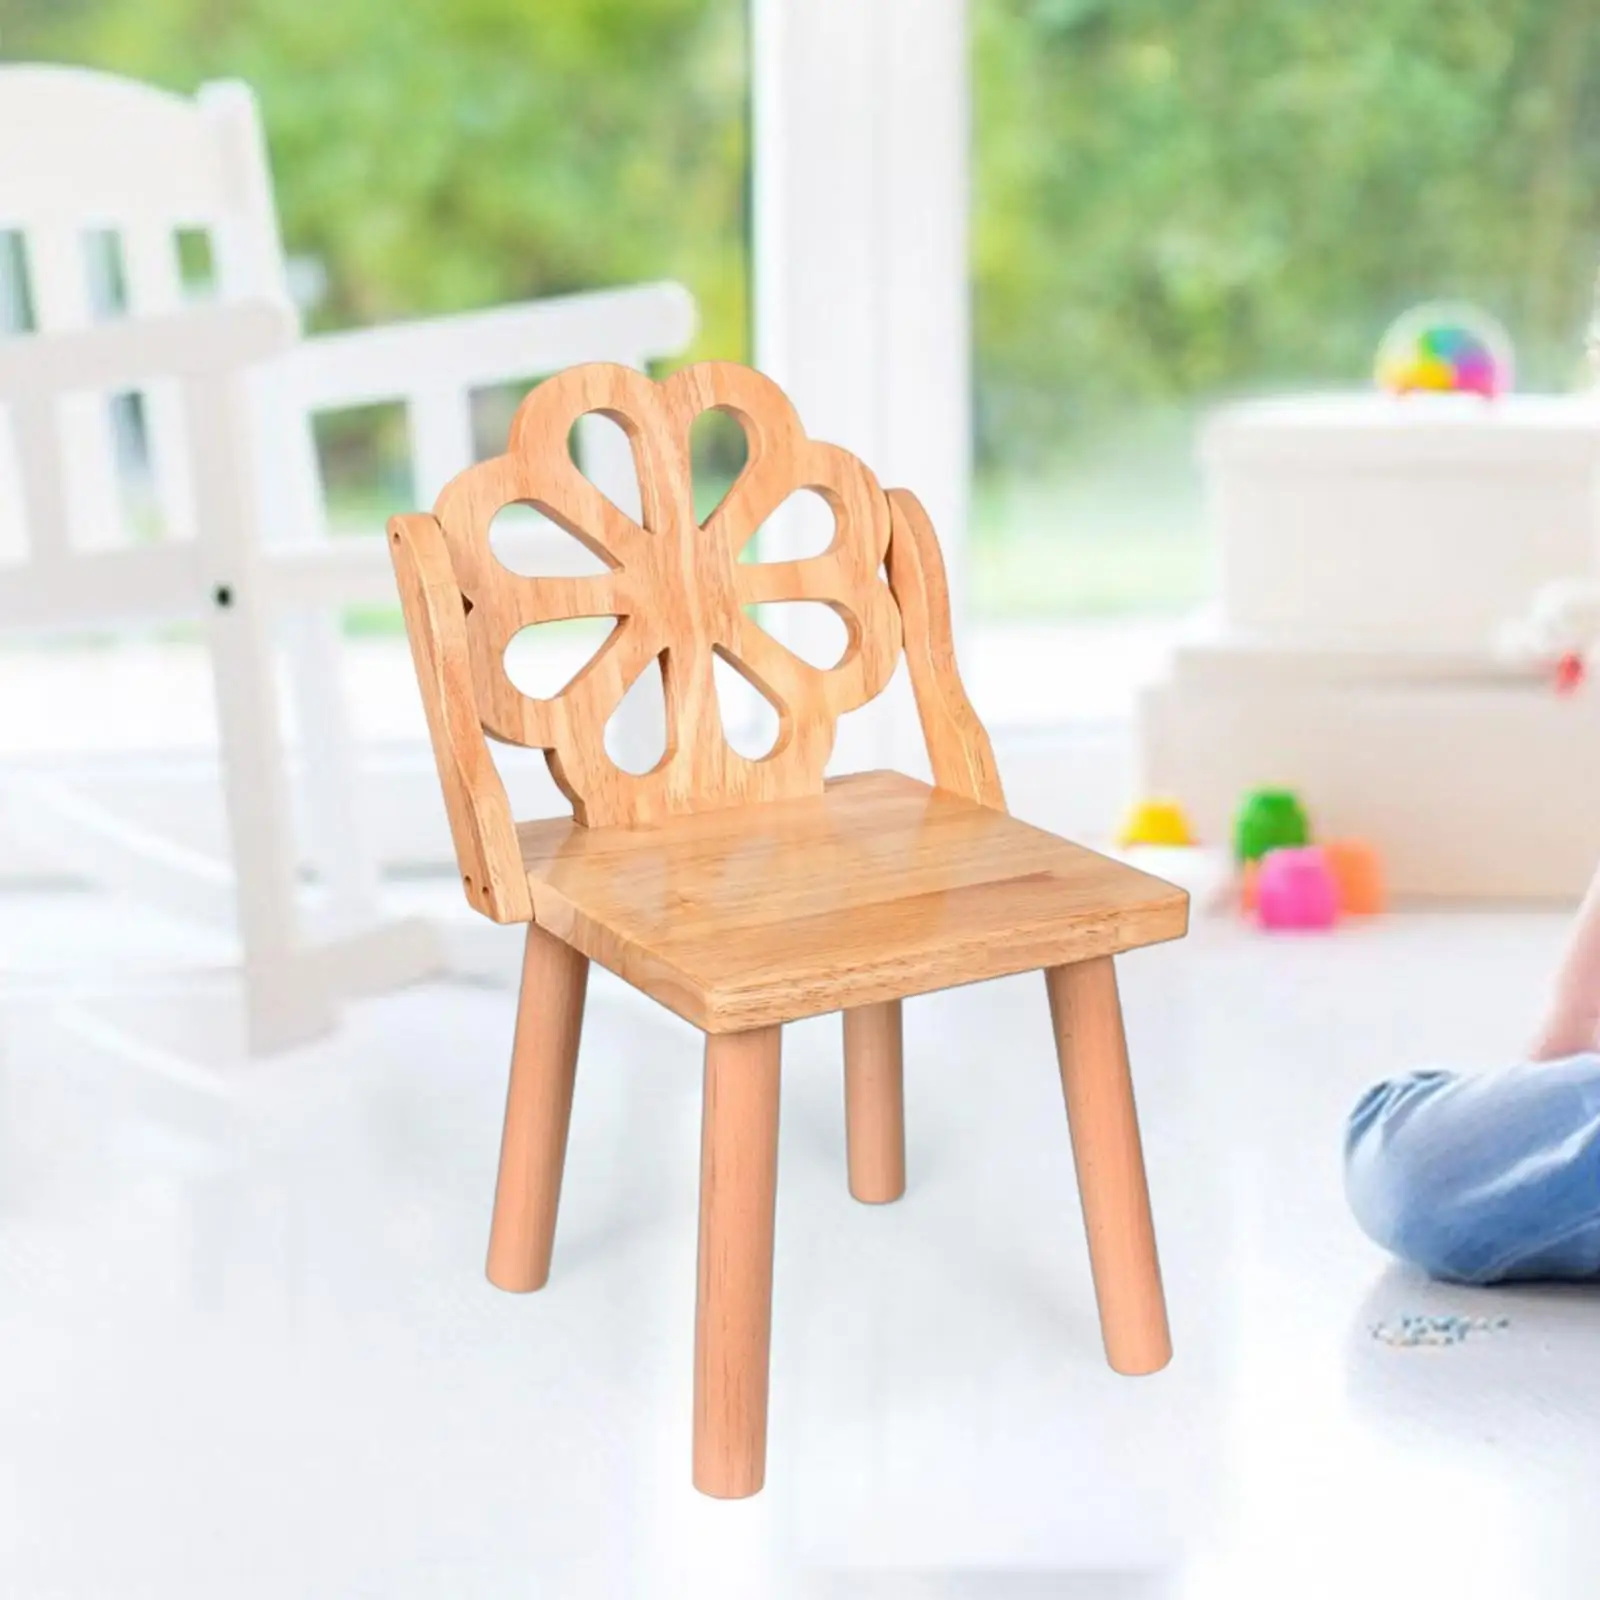 Wooden Removable Wooden Child Stool Space Saving Durable Ultralight Small Seat Stool for Kids for Nursery School Bathroom Home